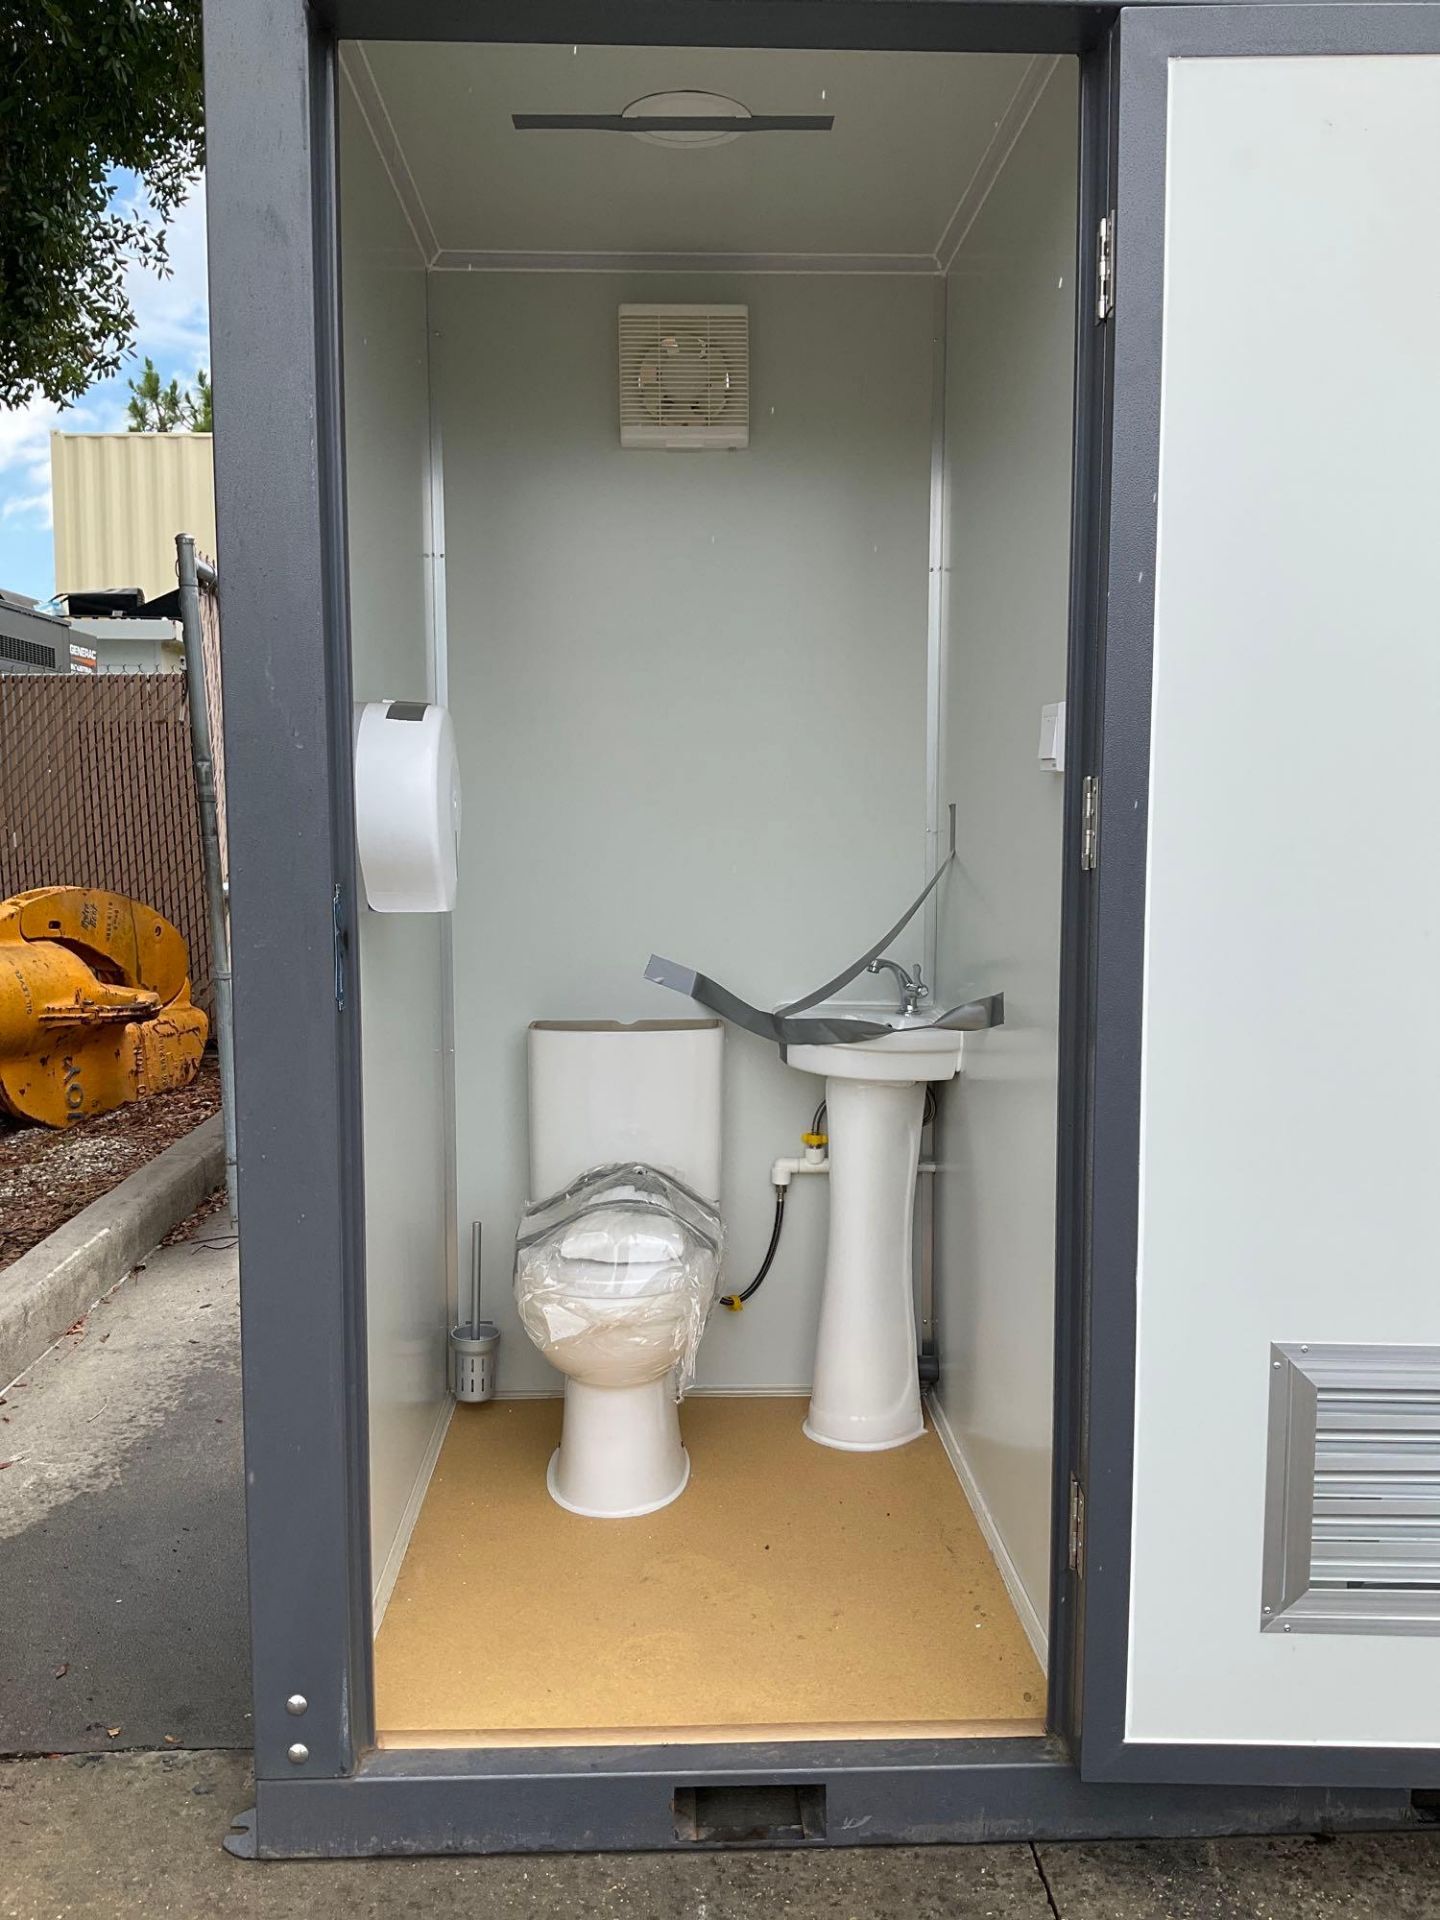 UNUSED PORTABLE DOUBLE BATHROOM UNIT, 2 STALLS, ELECTRIC & PLUMBING HOOK UP WITH EXTERIOR PLUMBING C - Image 13 of 15